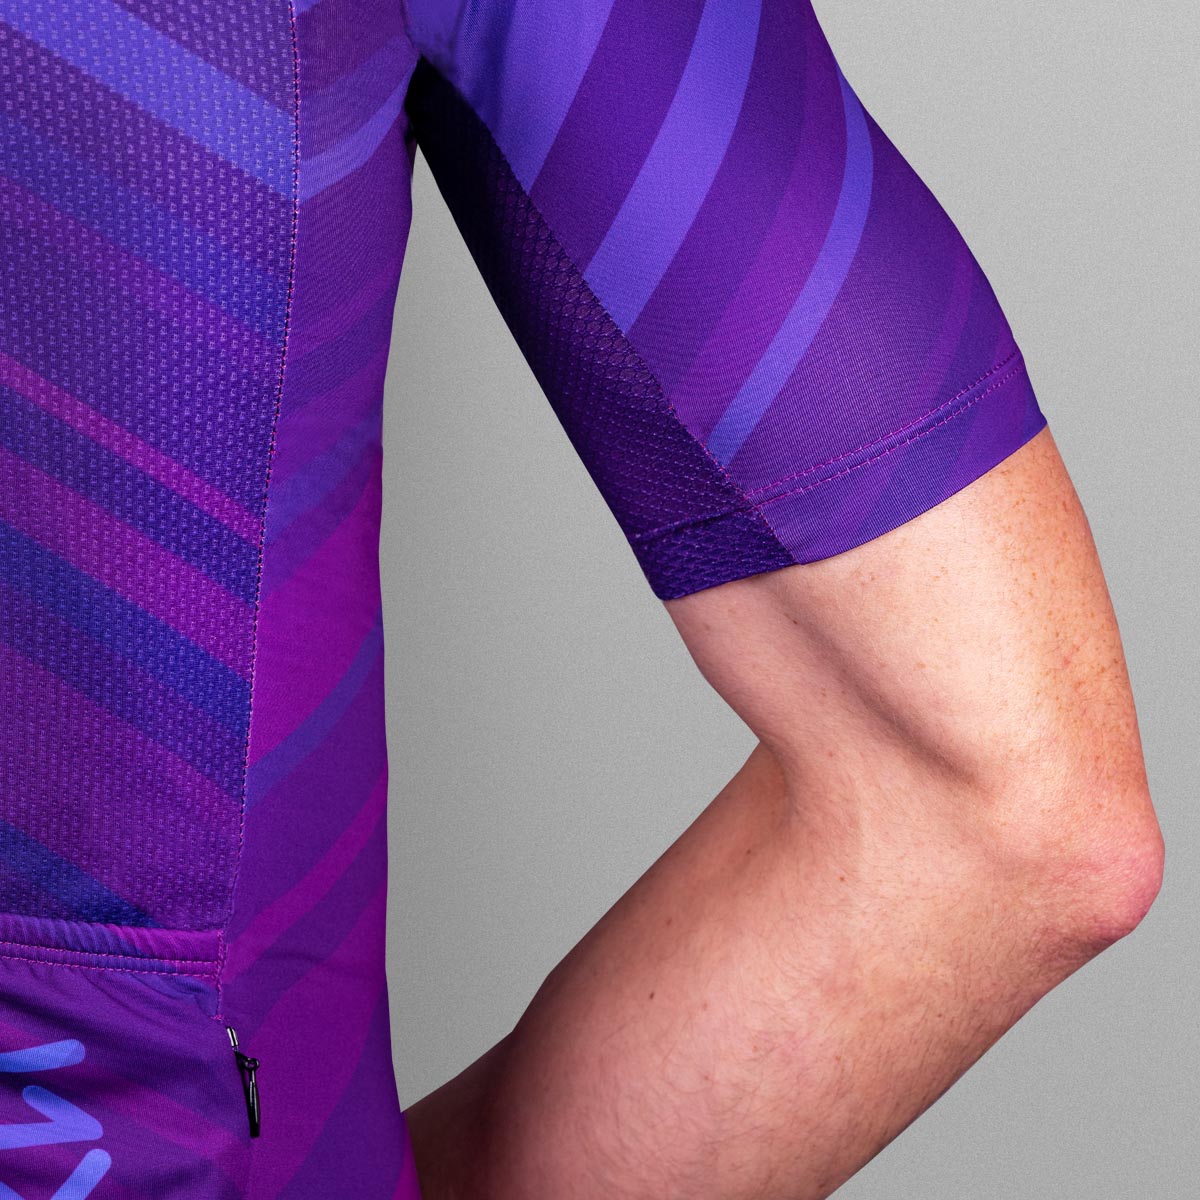 Solid color Luxa cycling jersey in classic purple with minimalistic pattern